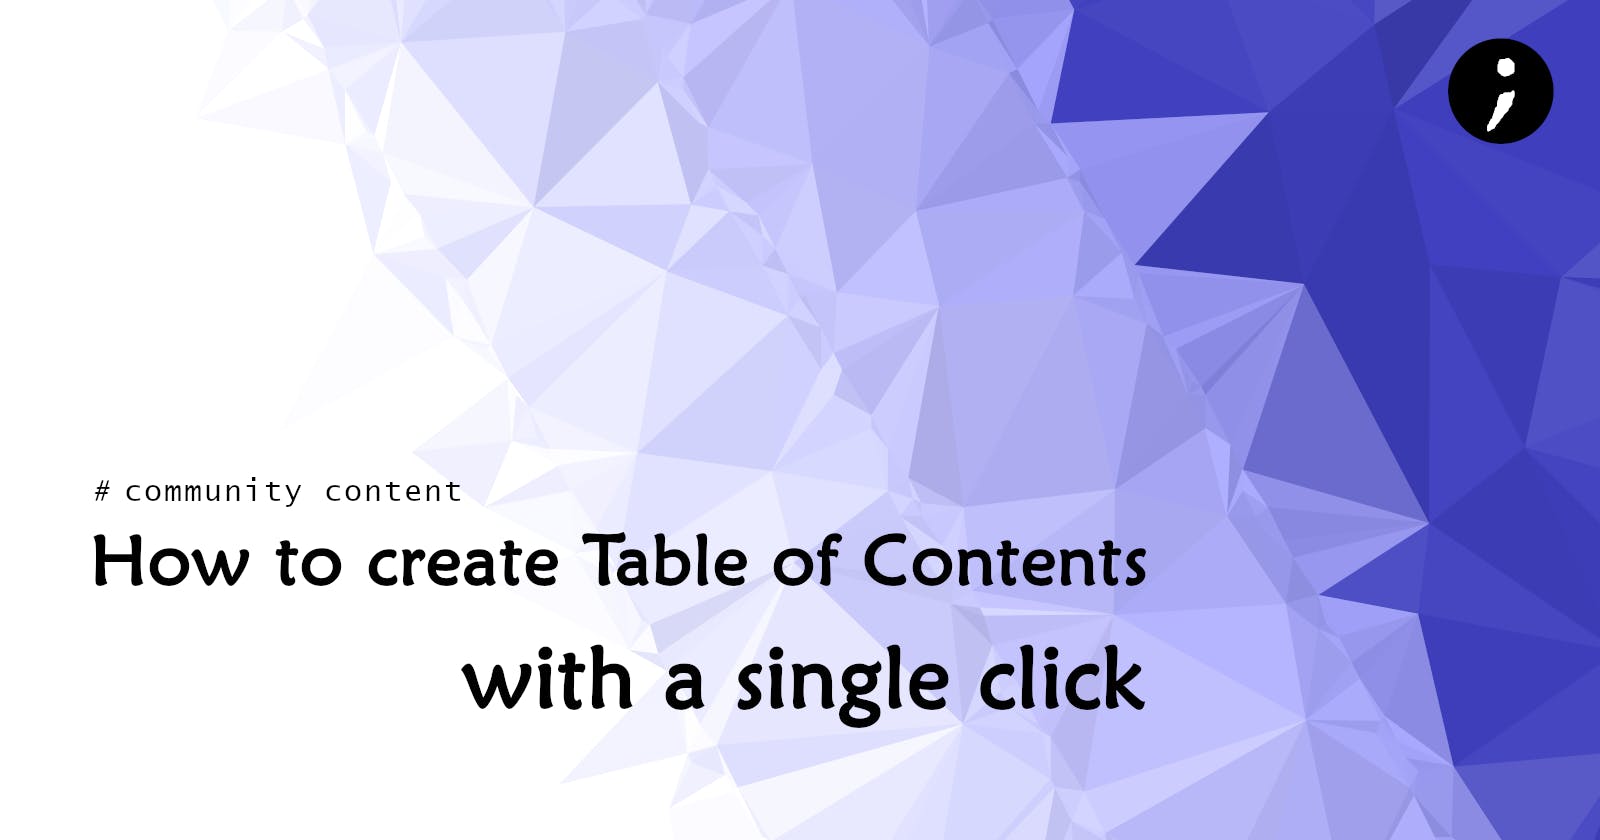 Generate Table of Contents with a single click